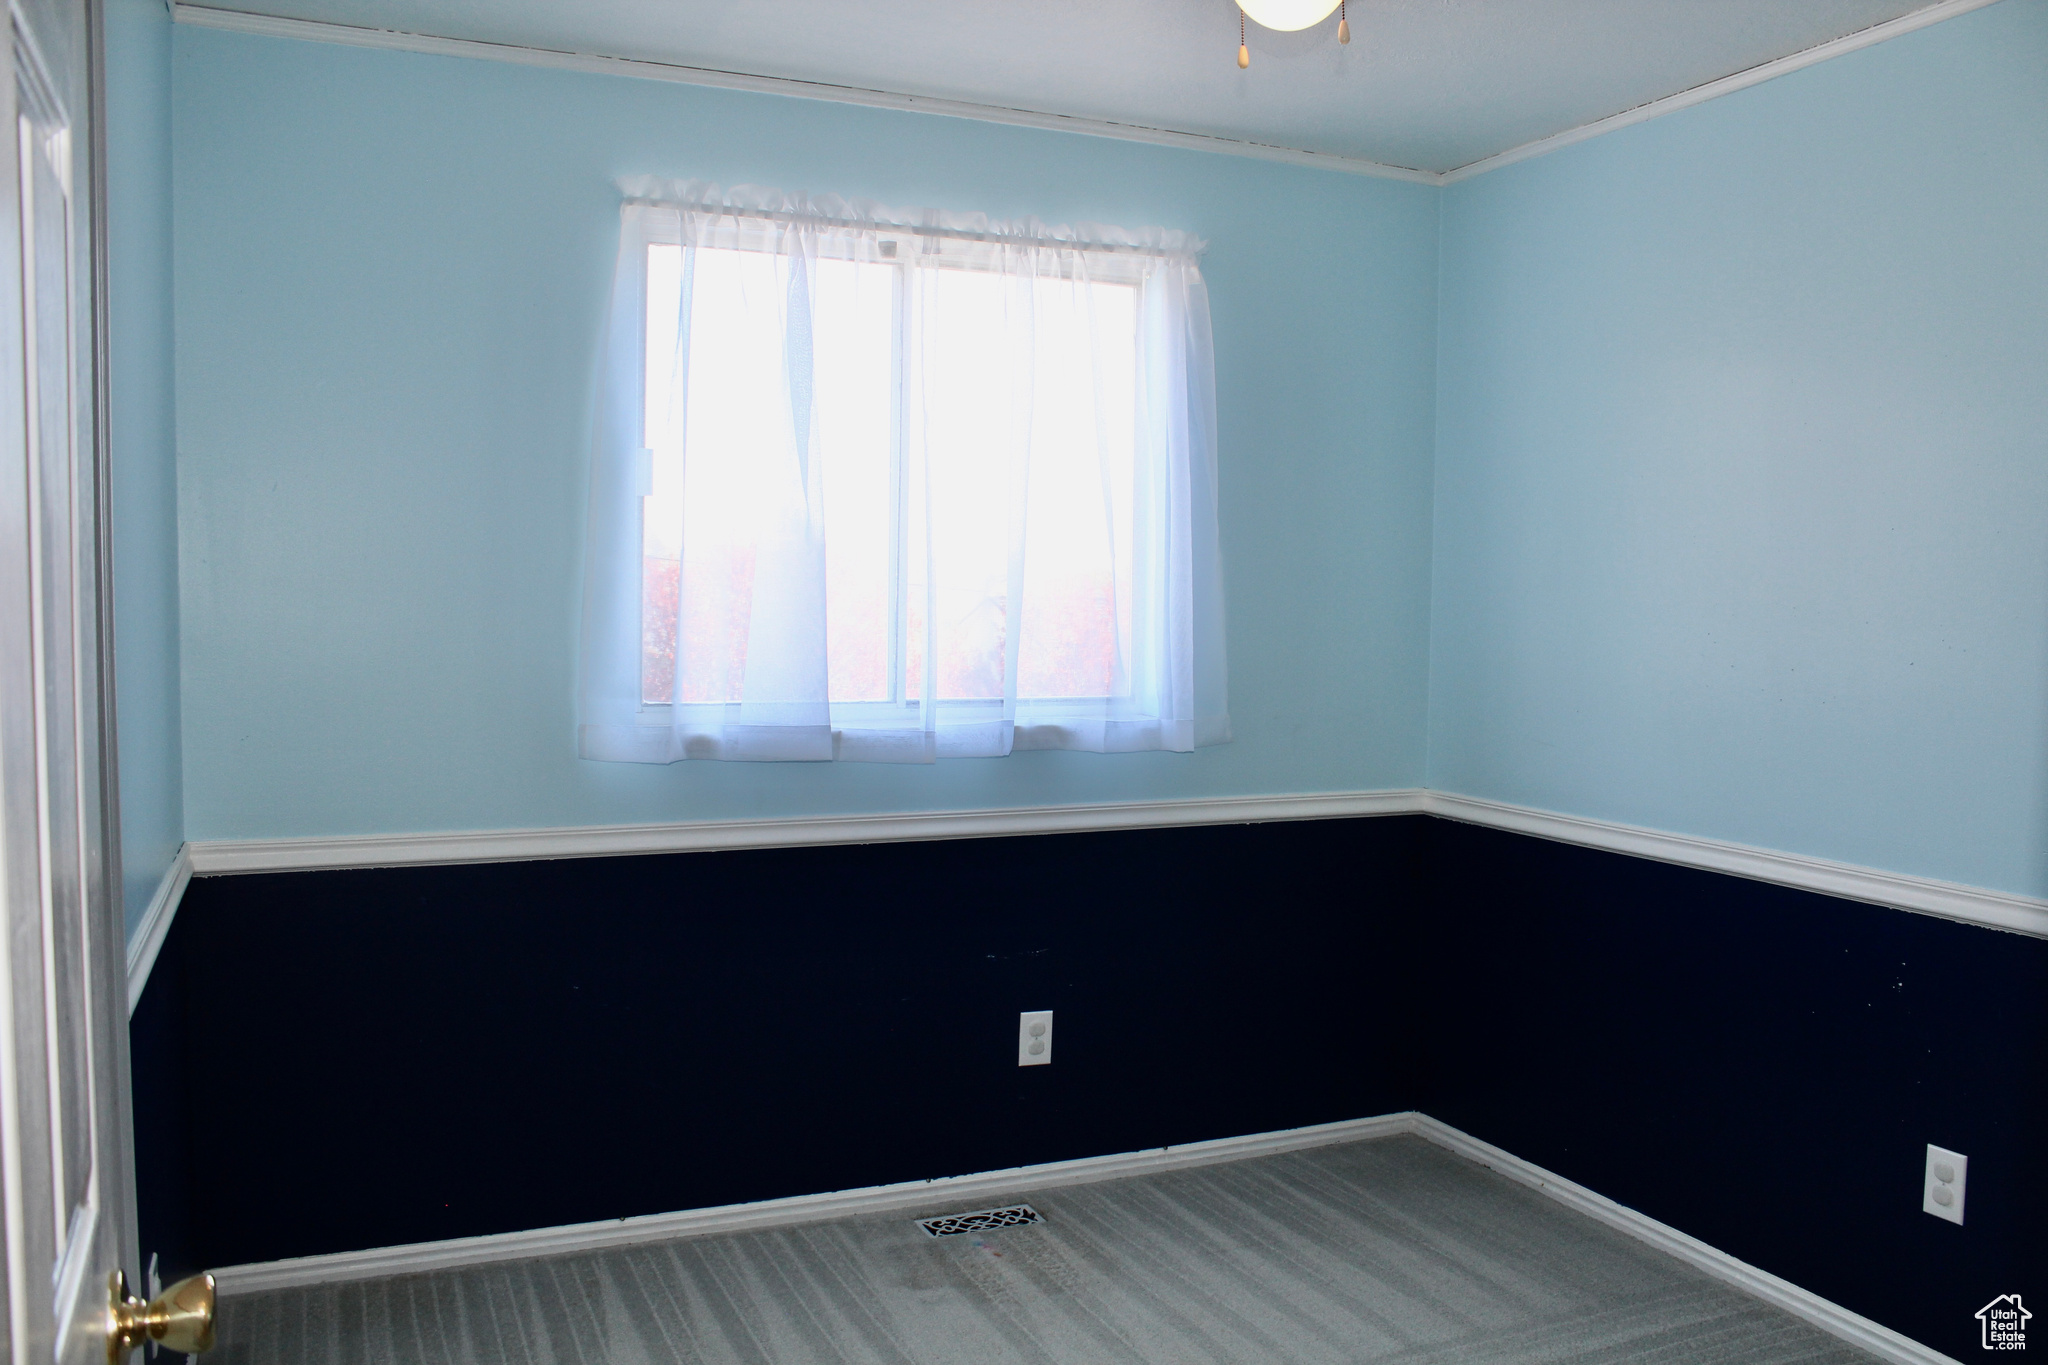 Second bedroom on upper level